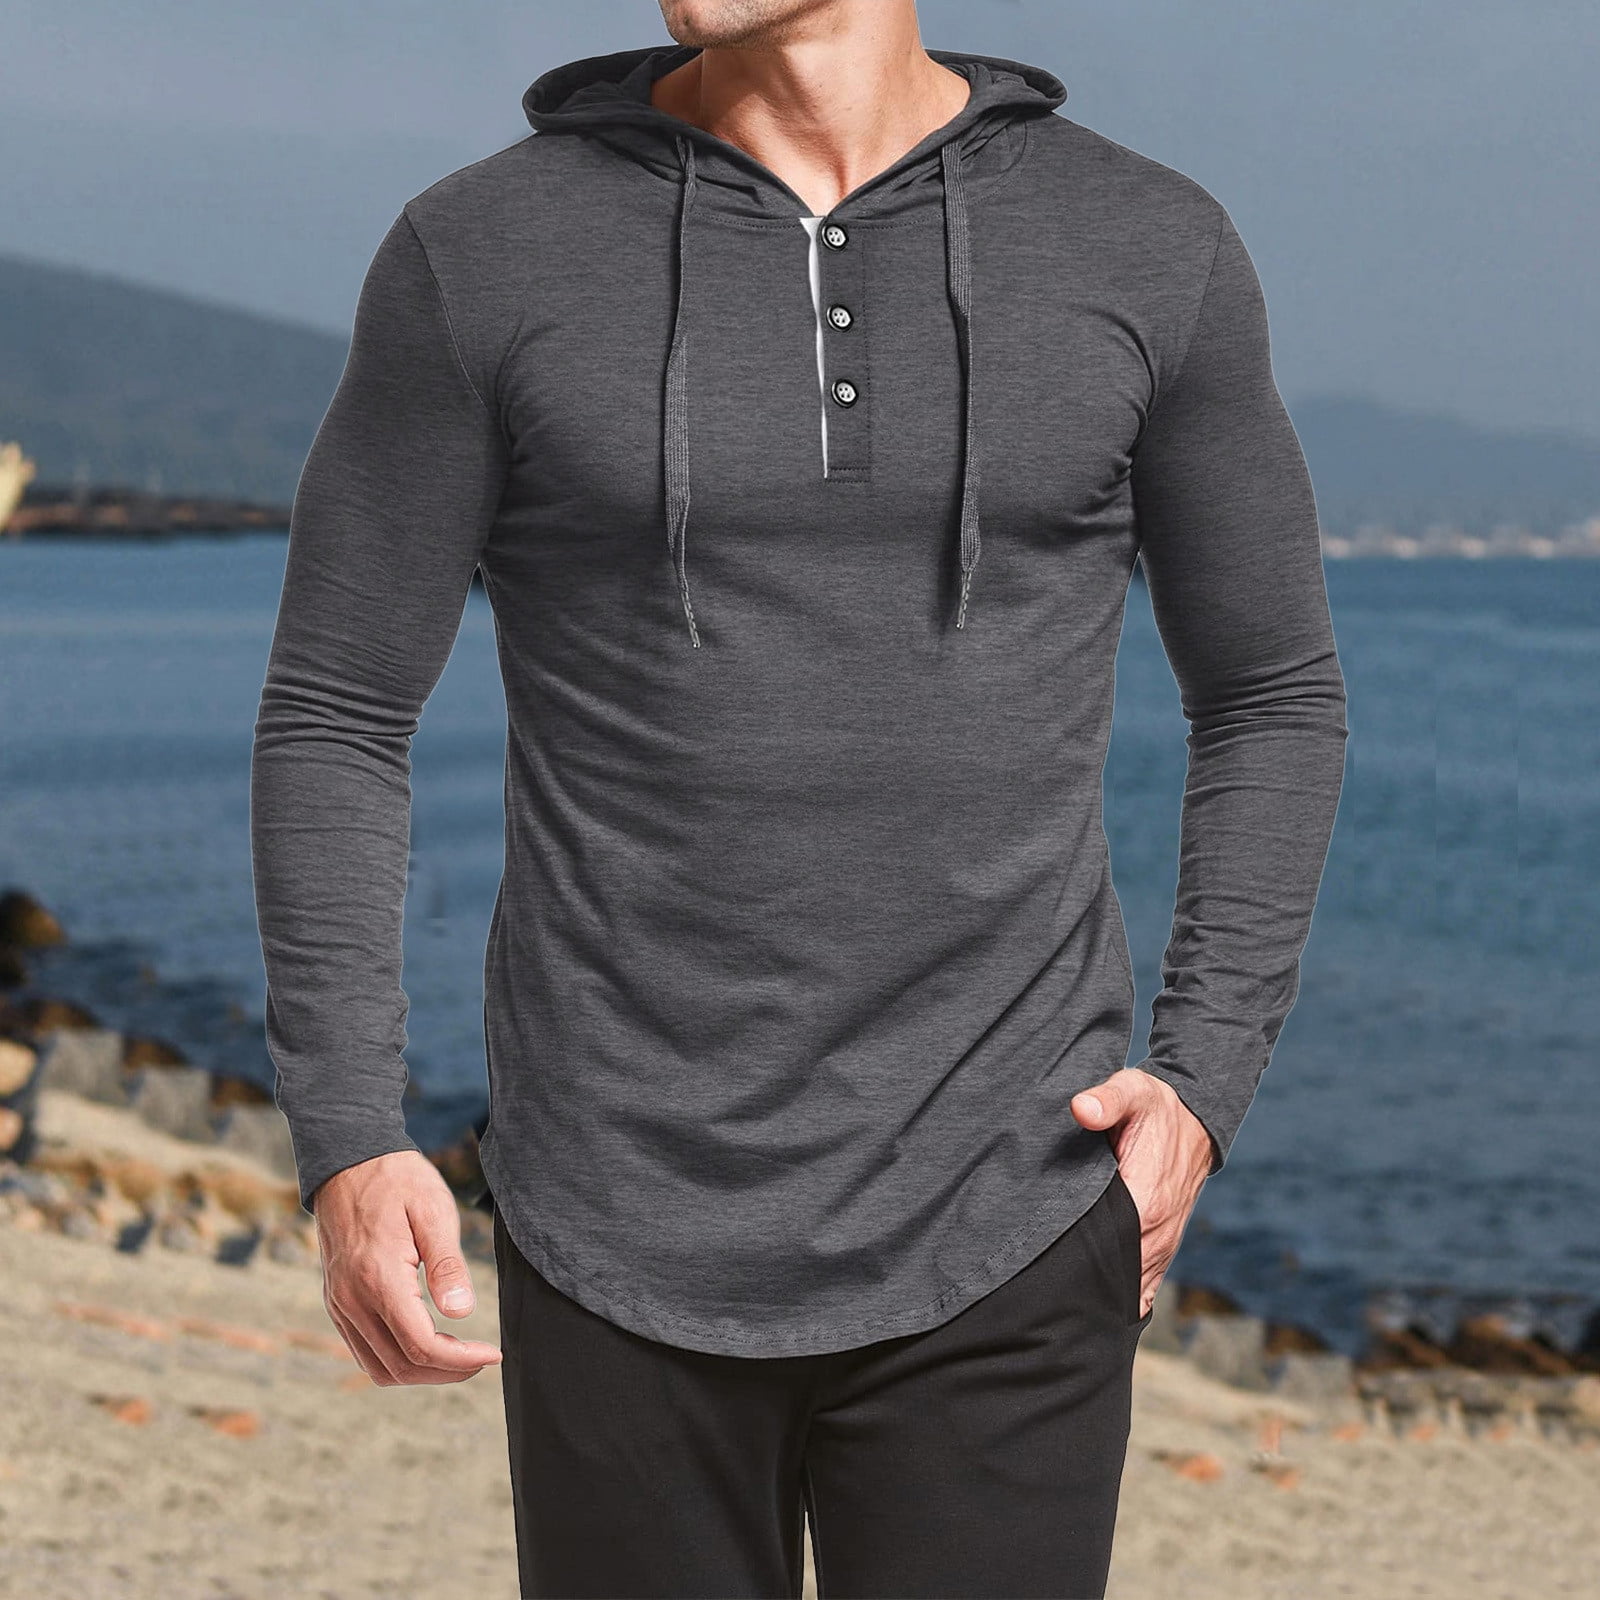 JERDAR Hoodies for Men Casual Fashion Shirts Solid Pullover Hooded